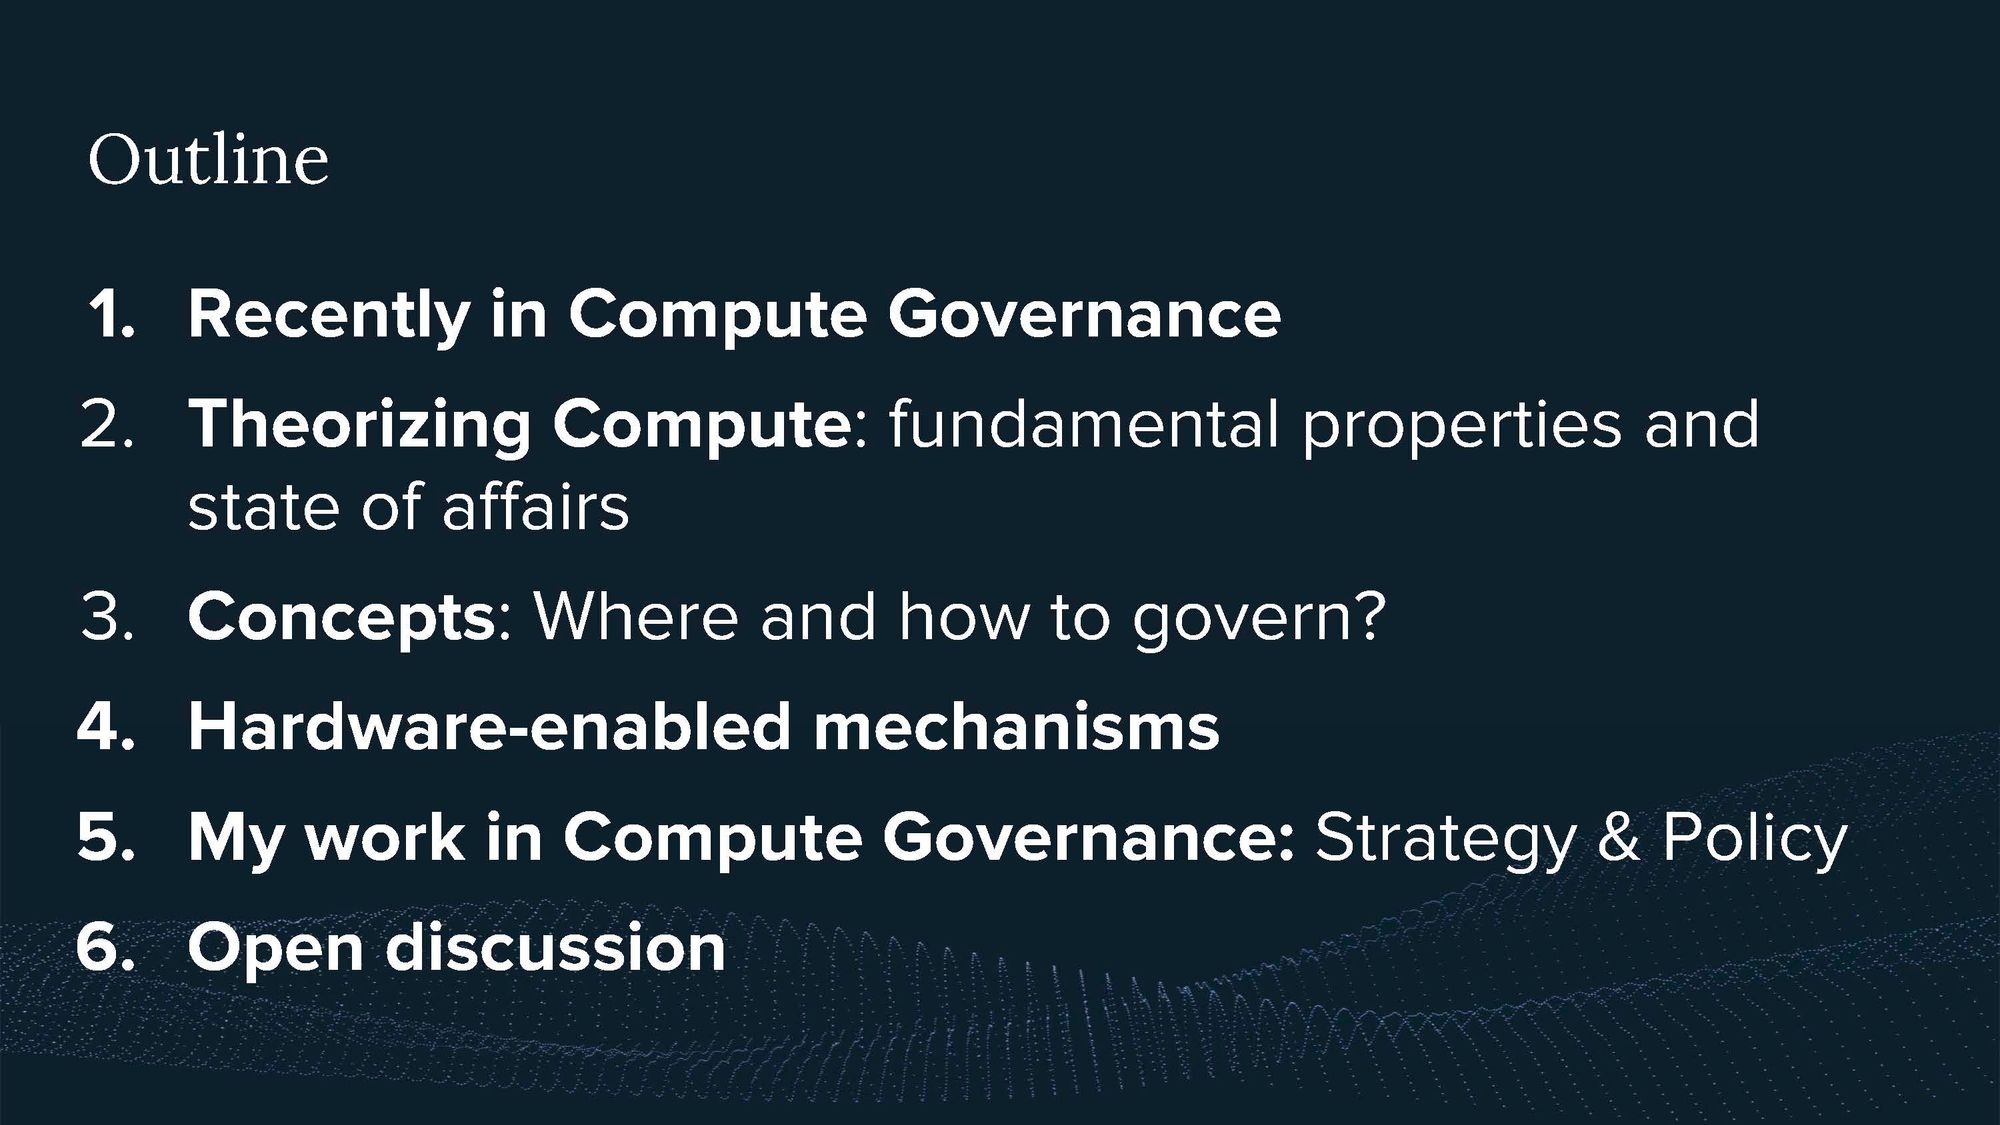 Video and Transcript of Presentation on Introduction to Compute Governance